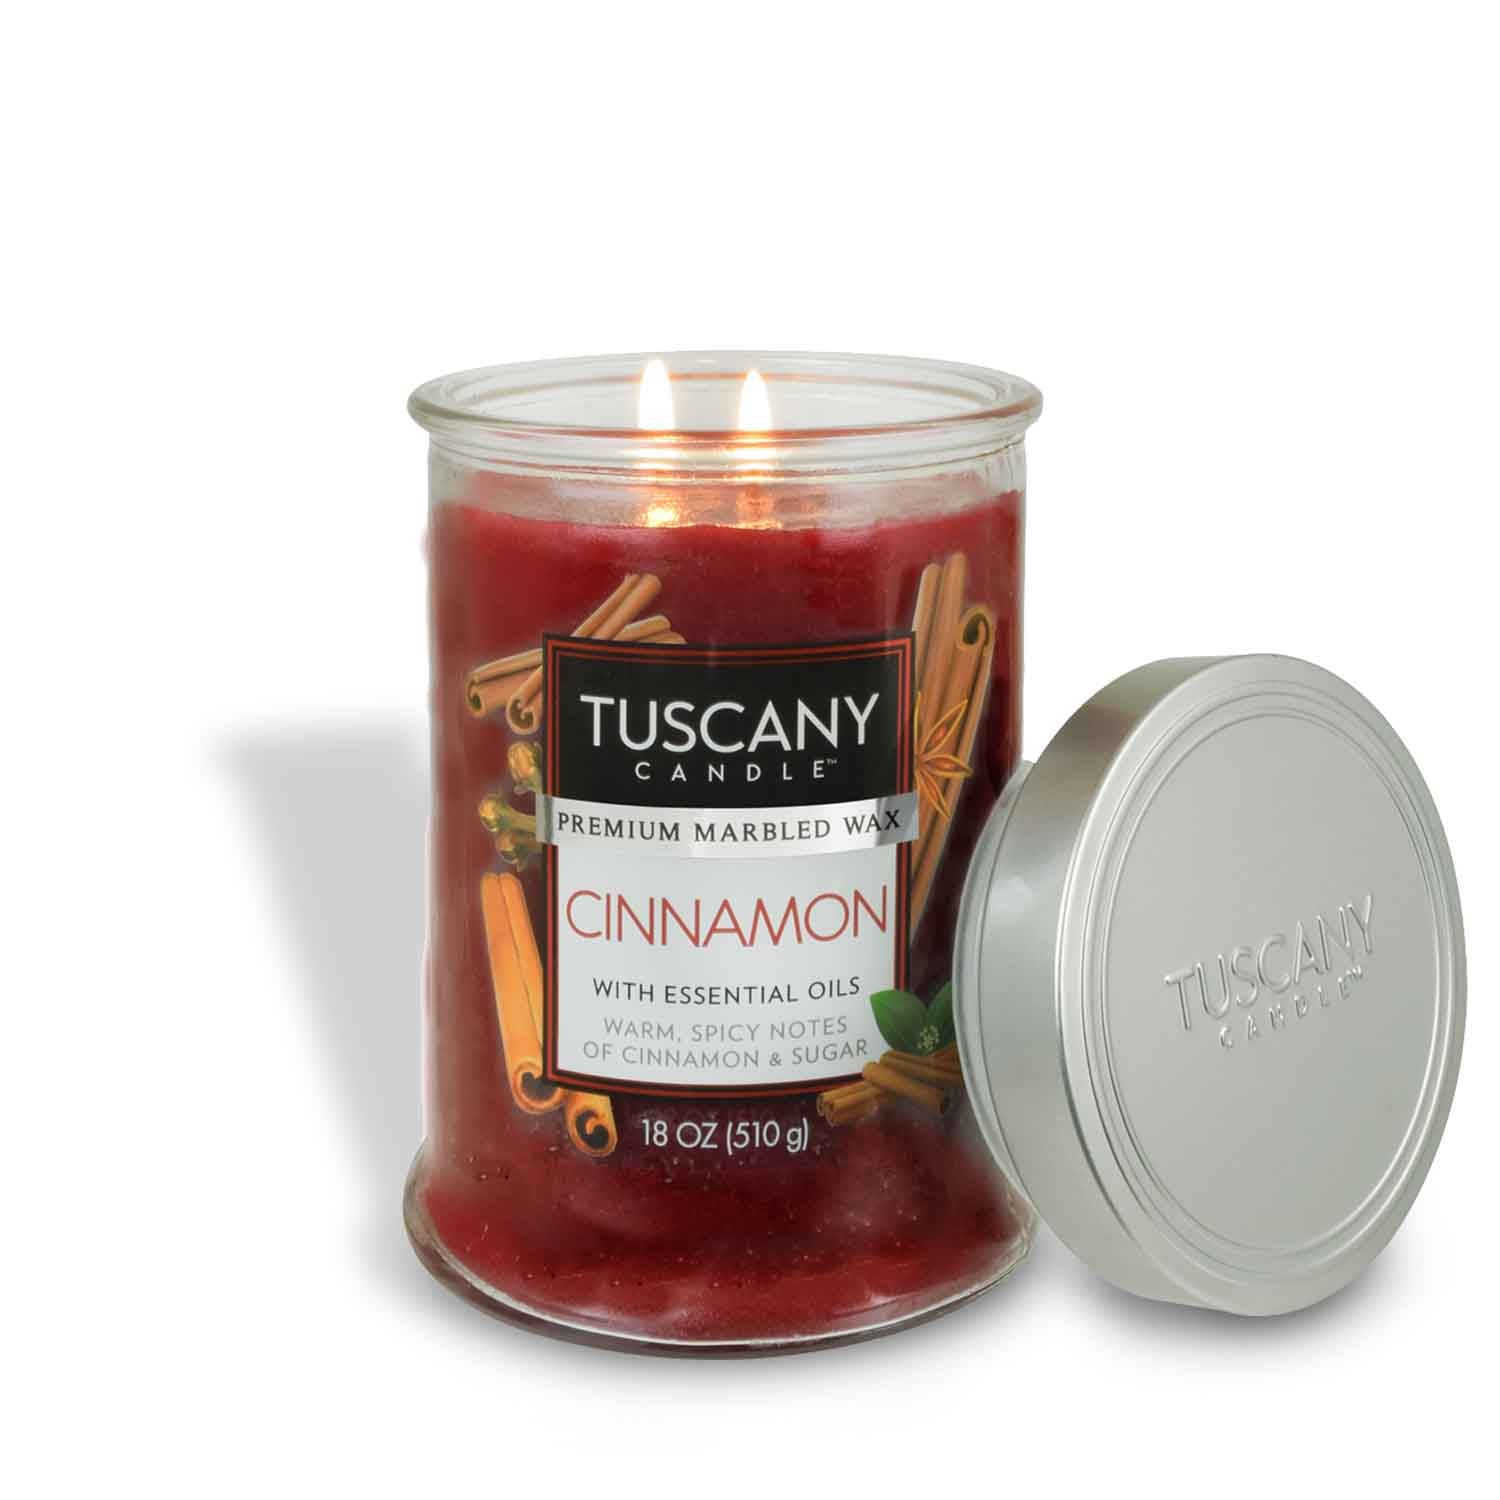 Tuscany Candle Cinnamon Long-Lasting Scented Jar Candle (18 oz).